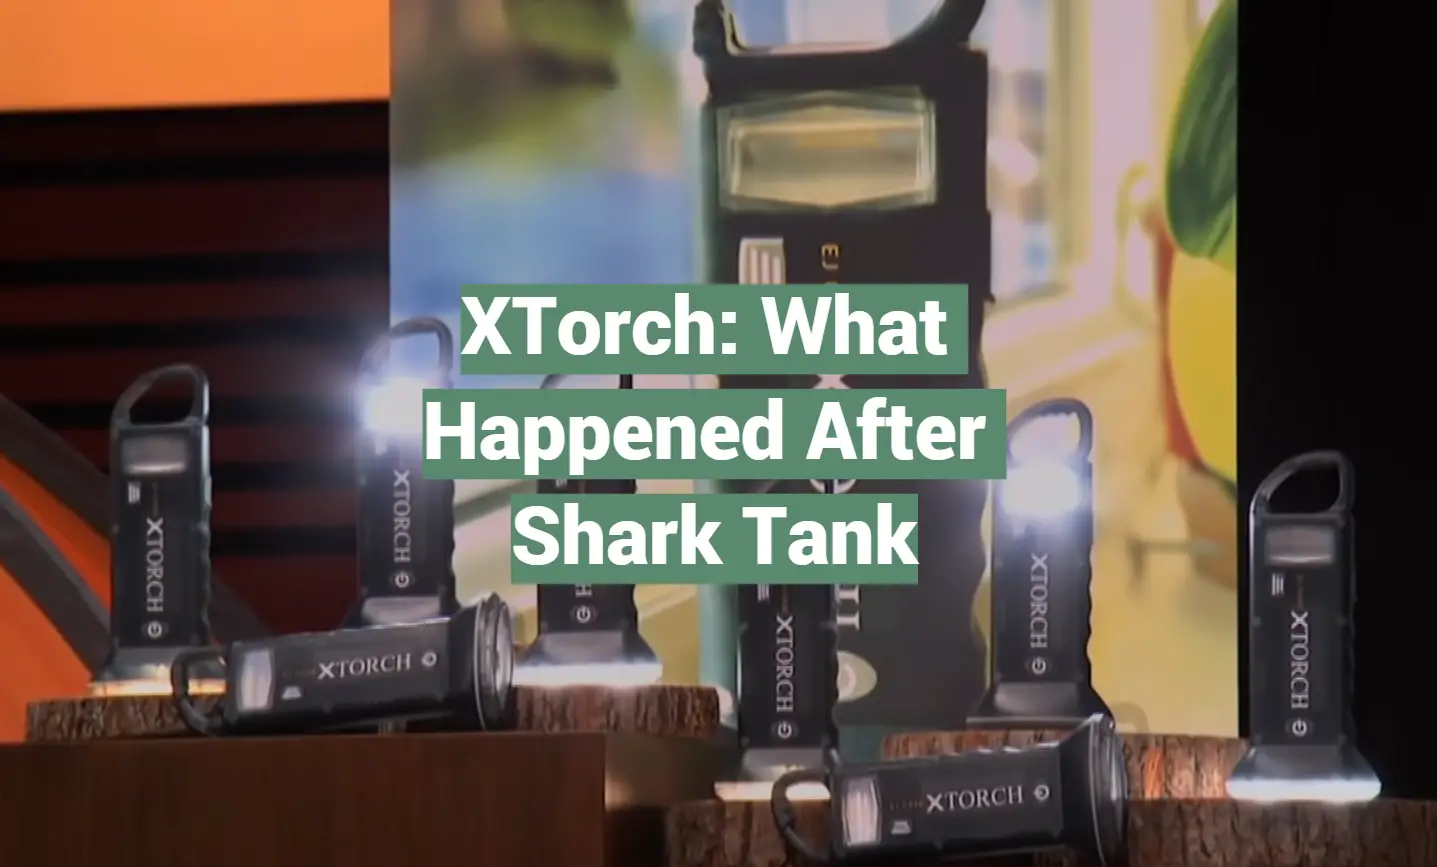 XTorch: What Happened After Shark Tank